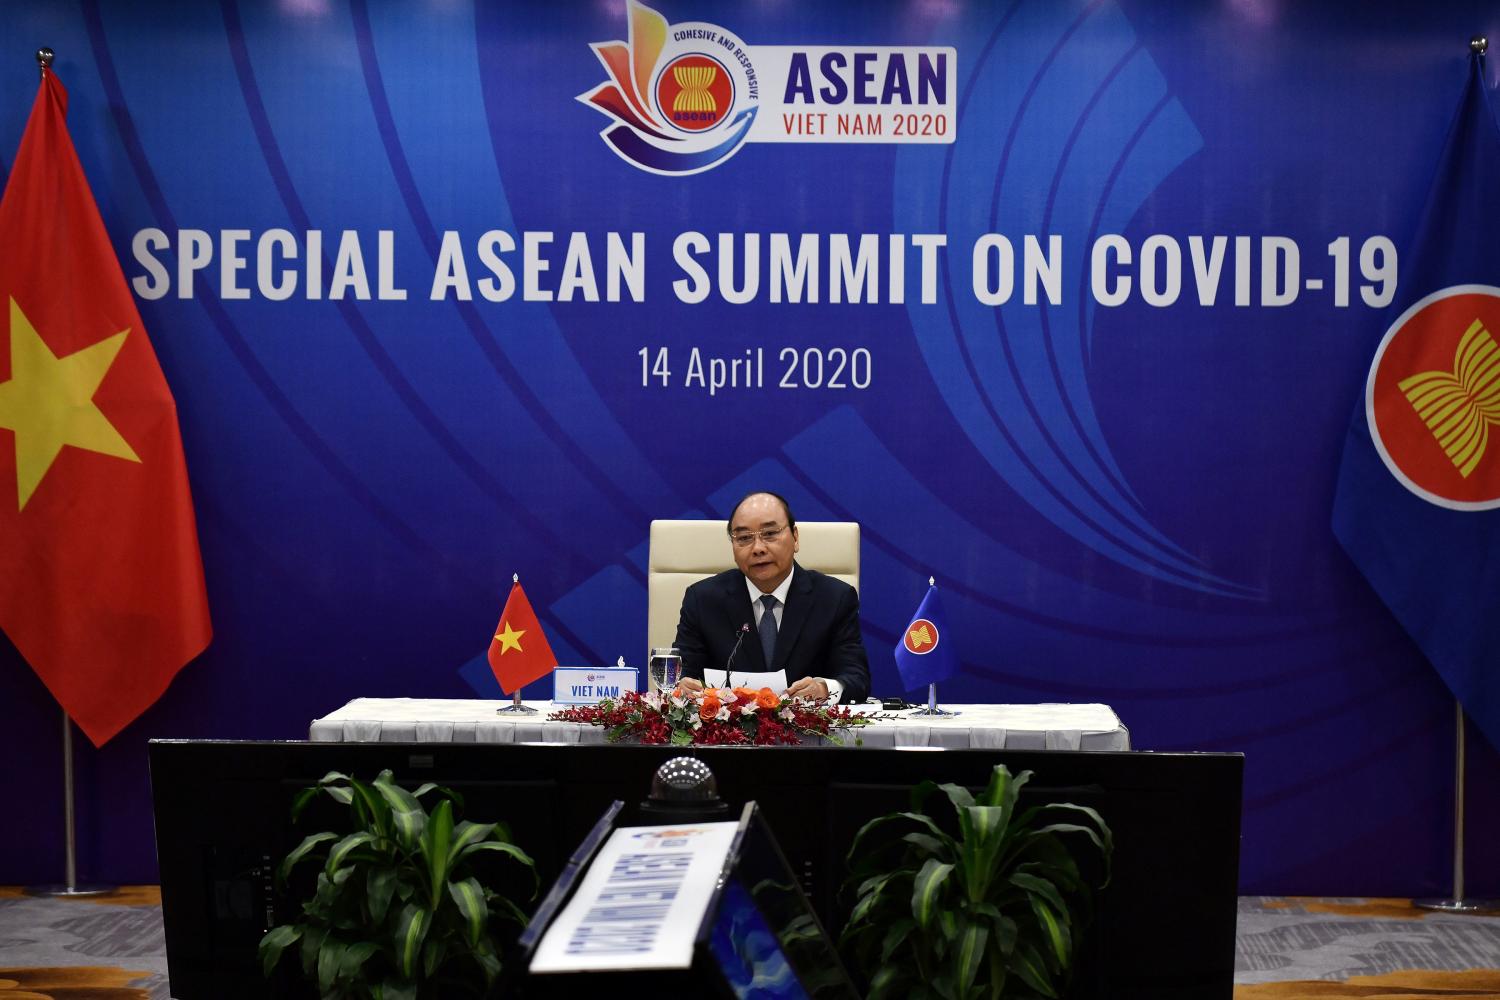 Vietnam's Prime Minister Nguyen Xuan Phuc addresses a special video conference with leaders of the Association of Southeast Asian Nations (ASEAN) on the coronavirus disease (COVID-19), in Hanoi April 14, 2020.   Manan Vatsyayana/Pool via REUTERS